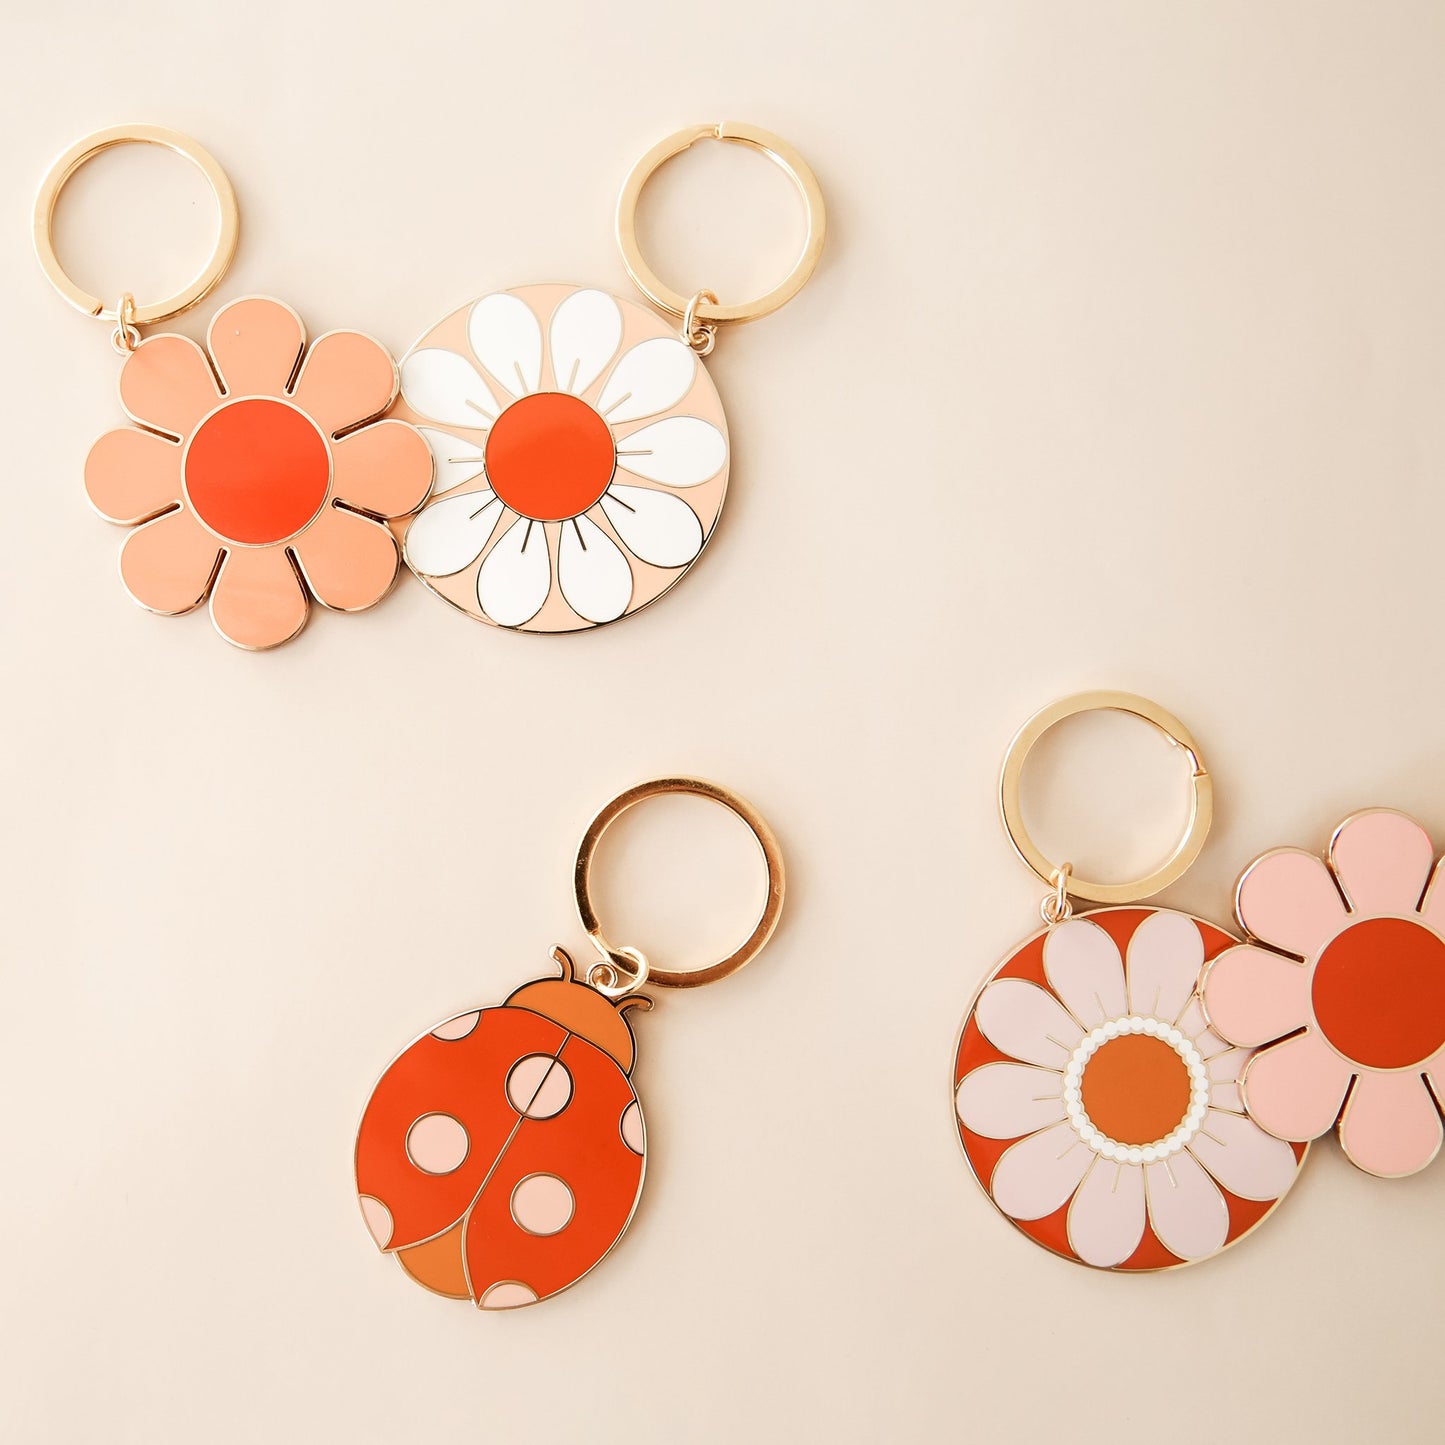 Five key chains, including a variety of warm toned flowers and a lady bug. Each keychain is complete with a golden key chain hoop.